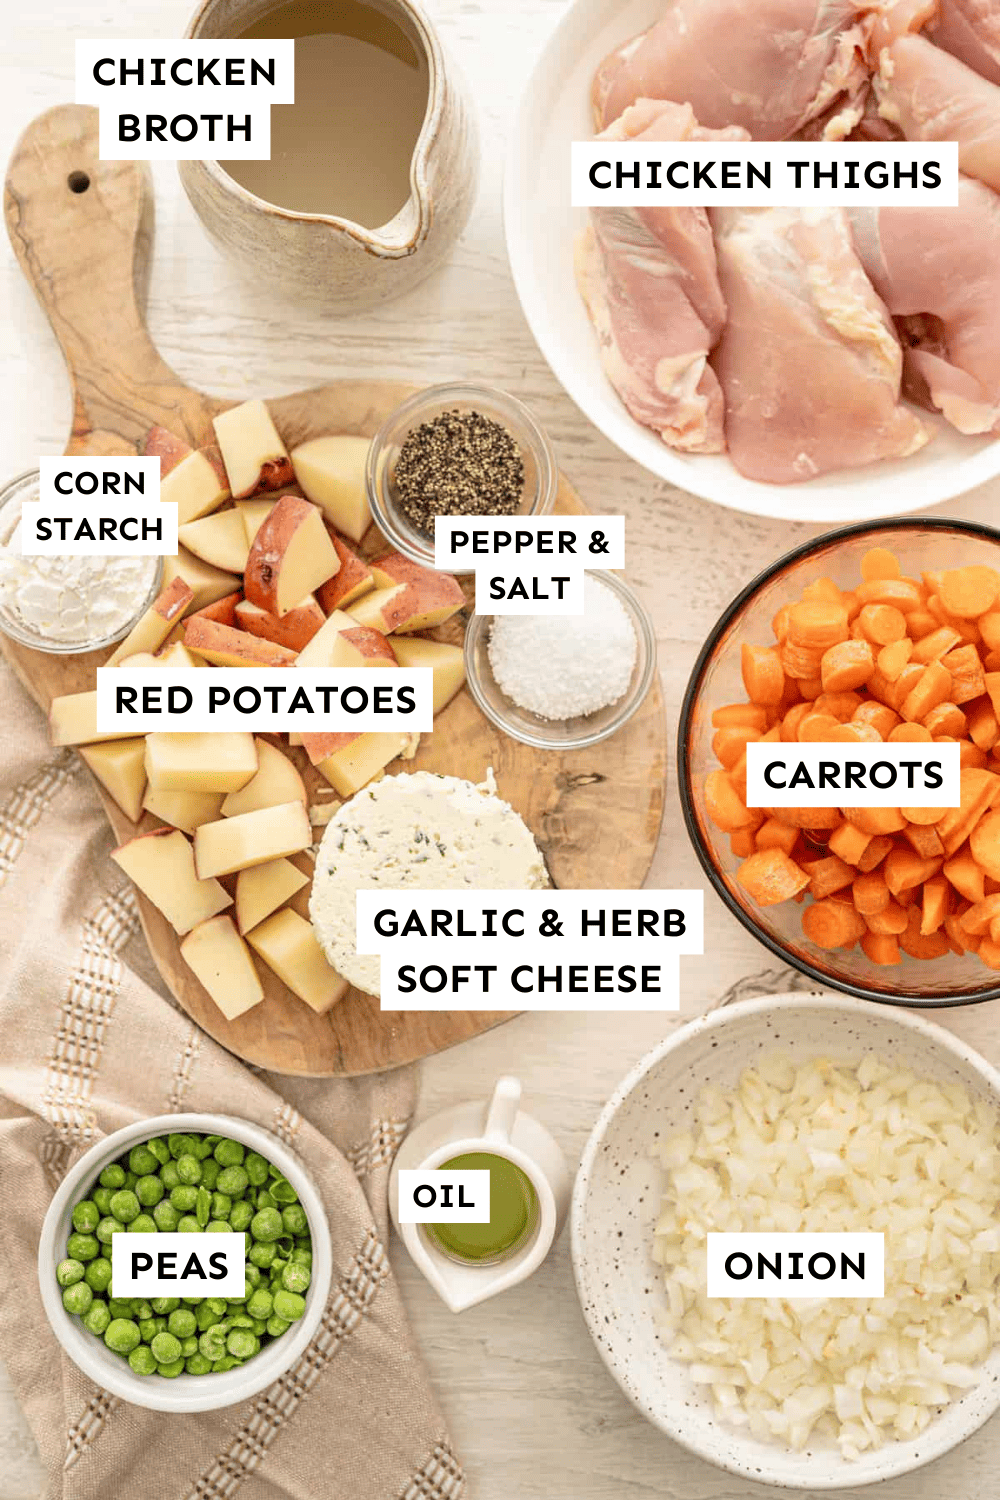 Instant Pot chicken pot pie ingredients measured out and labeled.